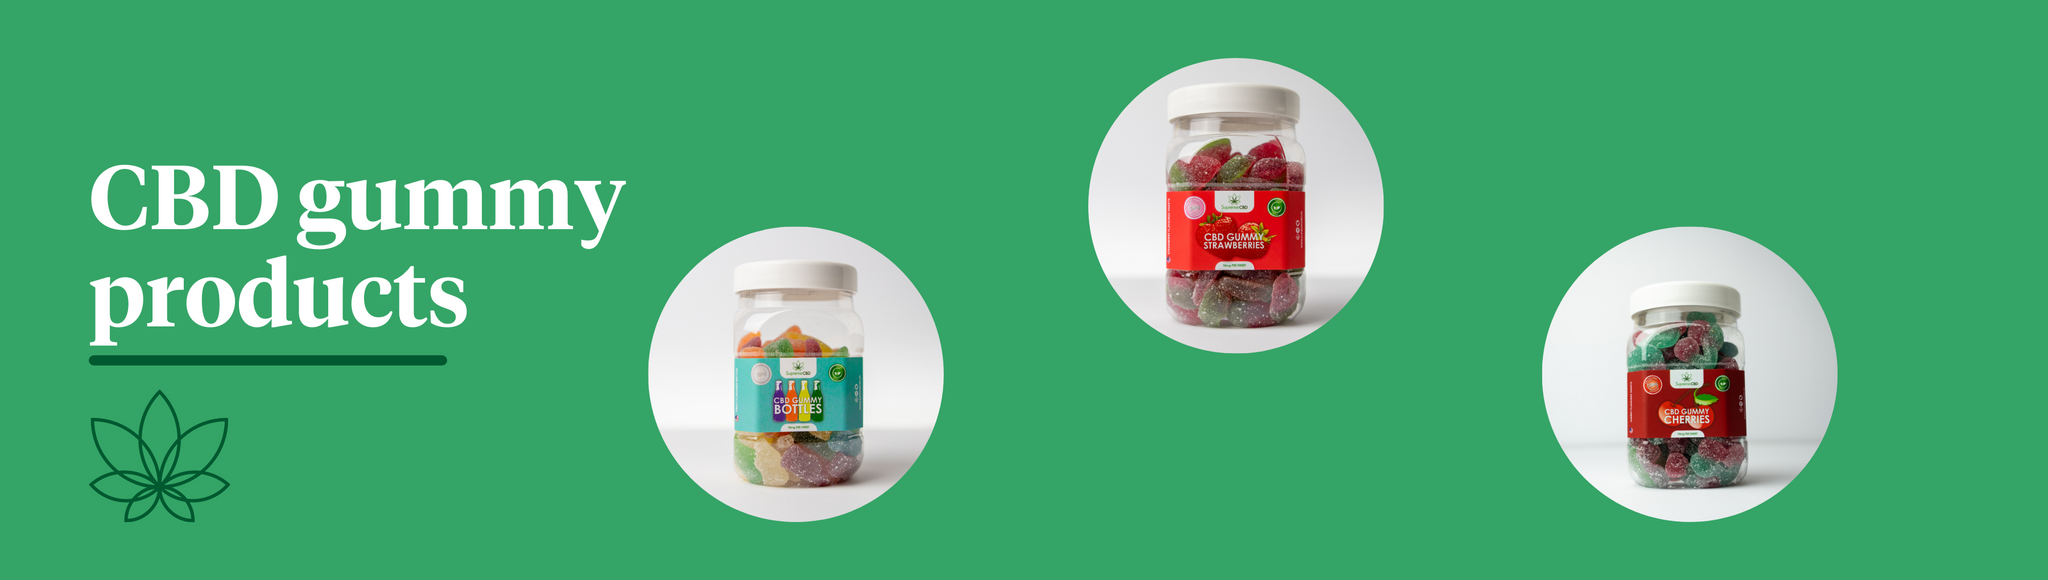 A green background with three images of Supreme CBD products, CBD bottles, CBD strawberries and CBD cherries.